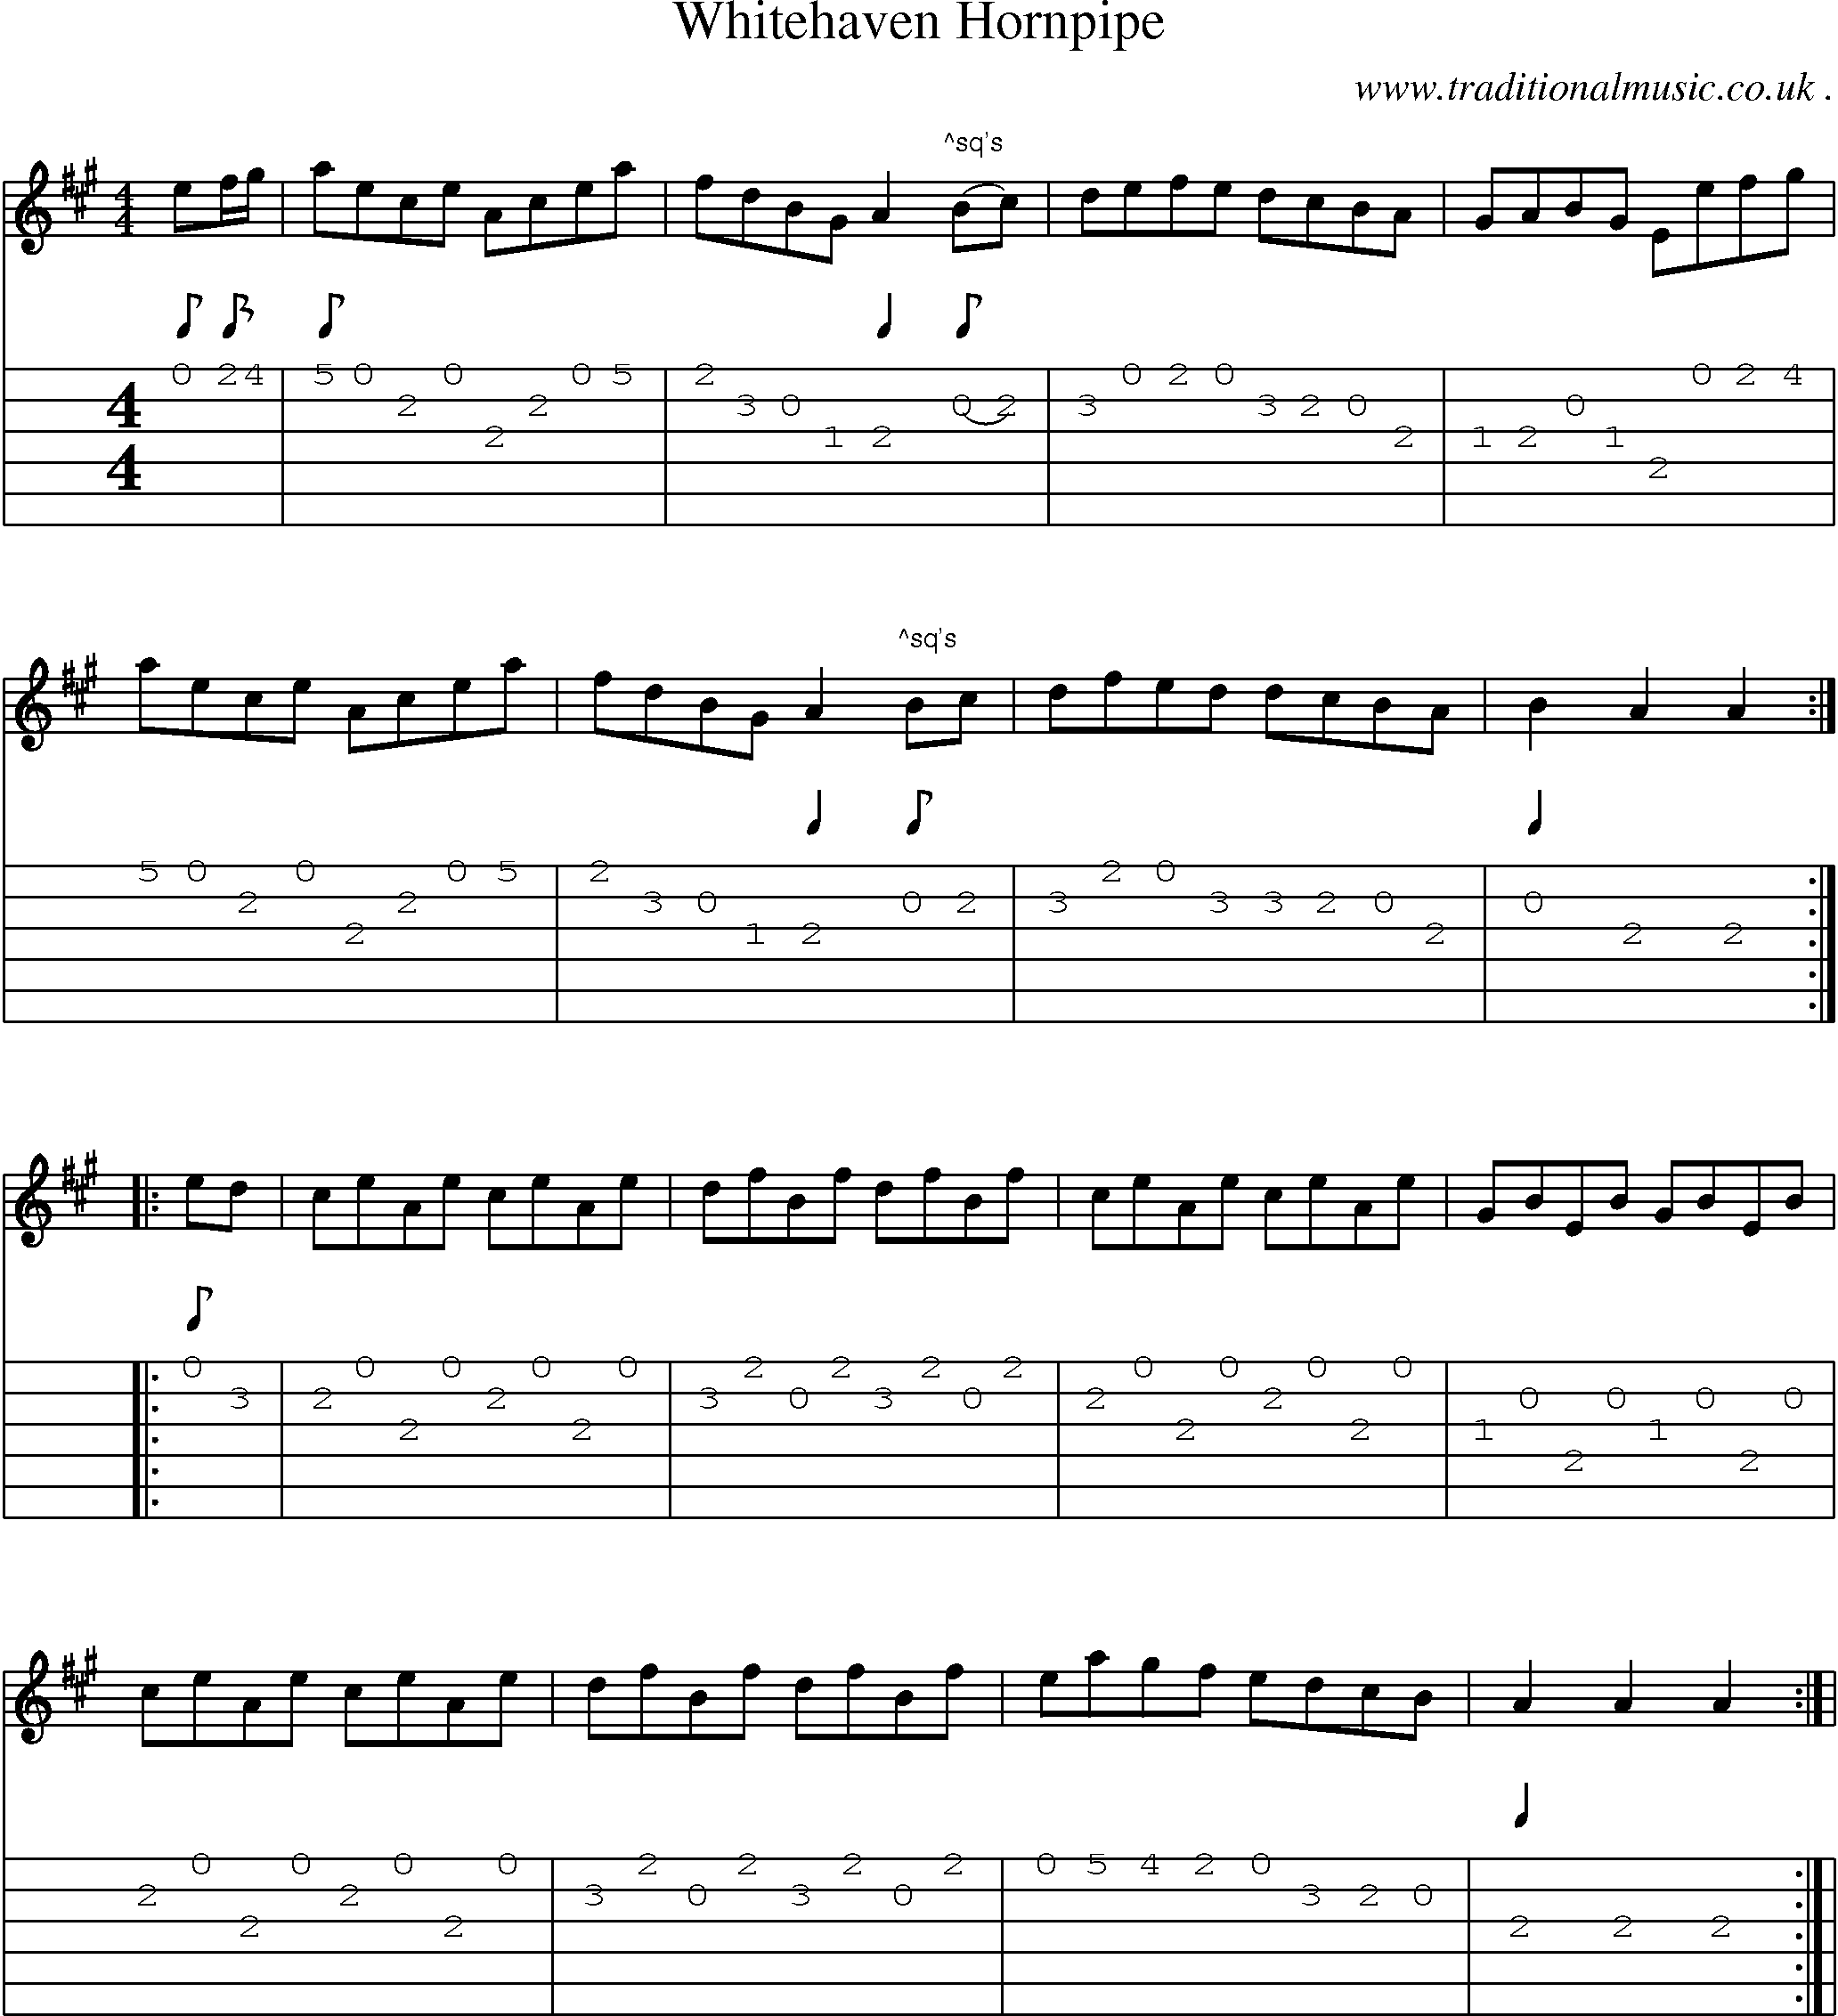 Sheet-Music and Guitar Tabs for Whitehaven Hornpipe